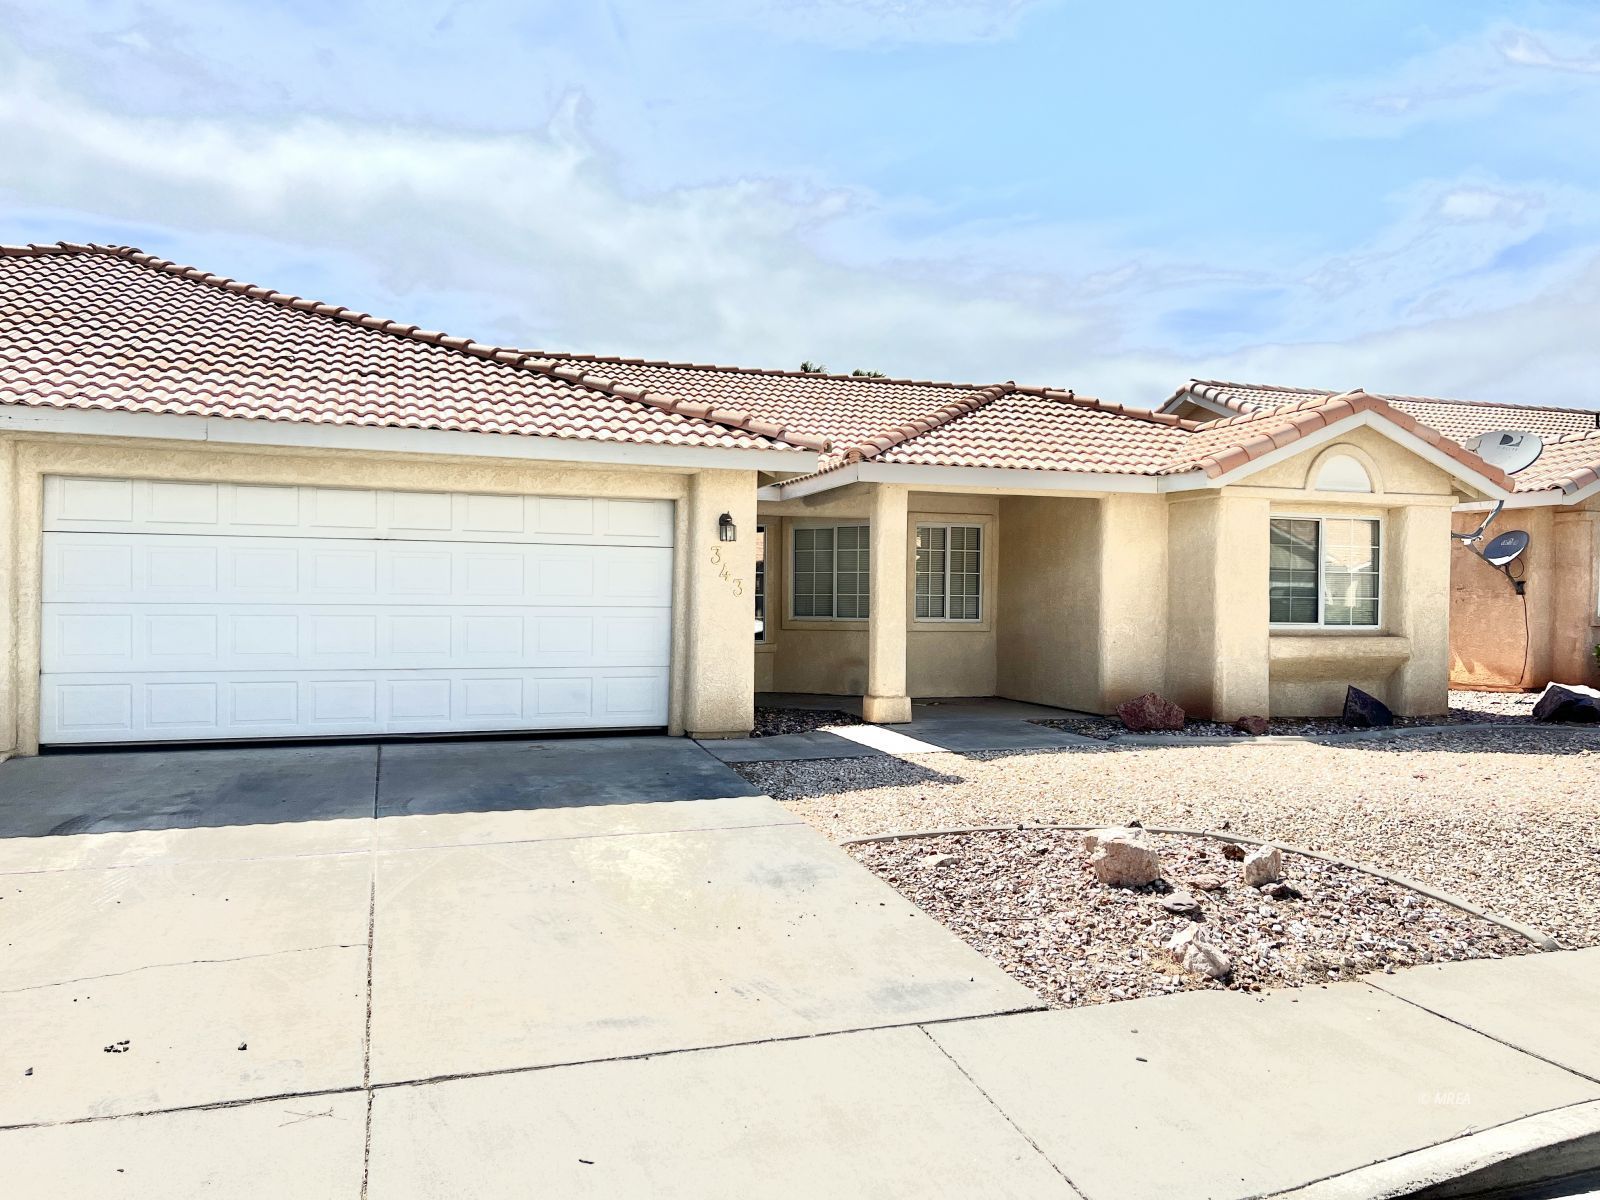 343 Concord Dr, Mesquite NV 89027